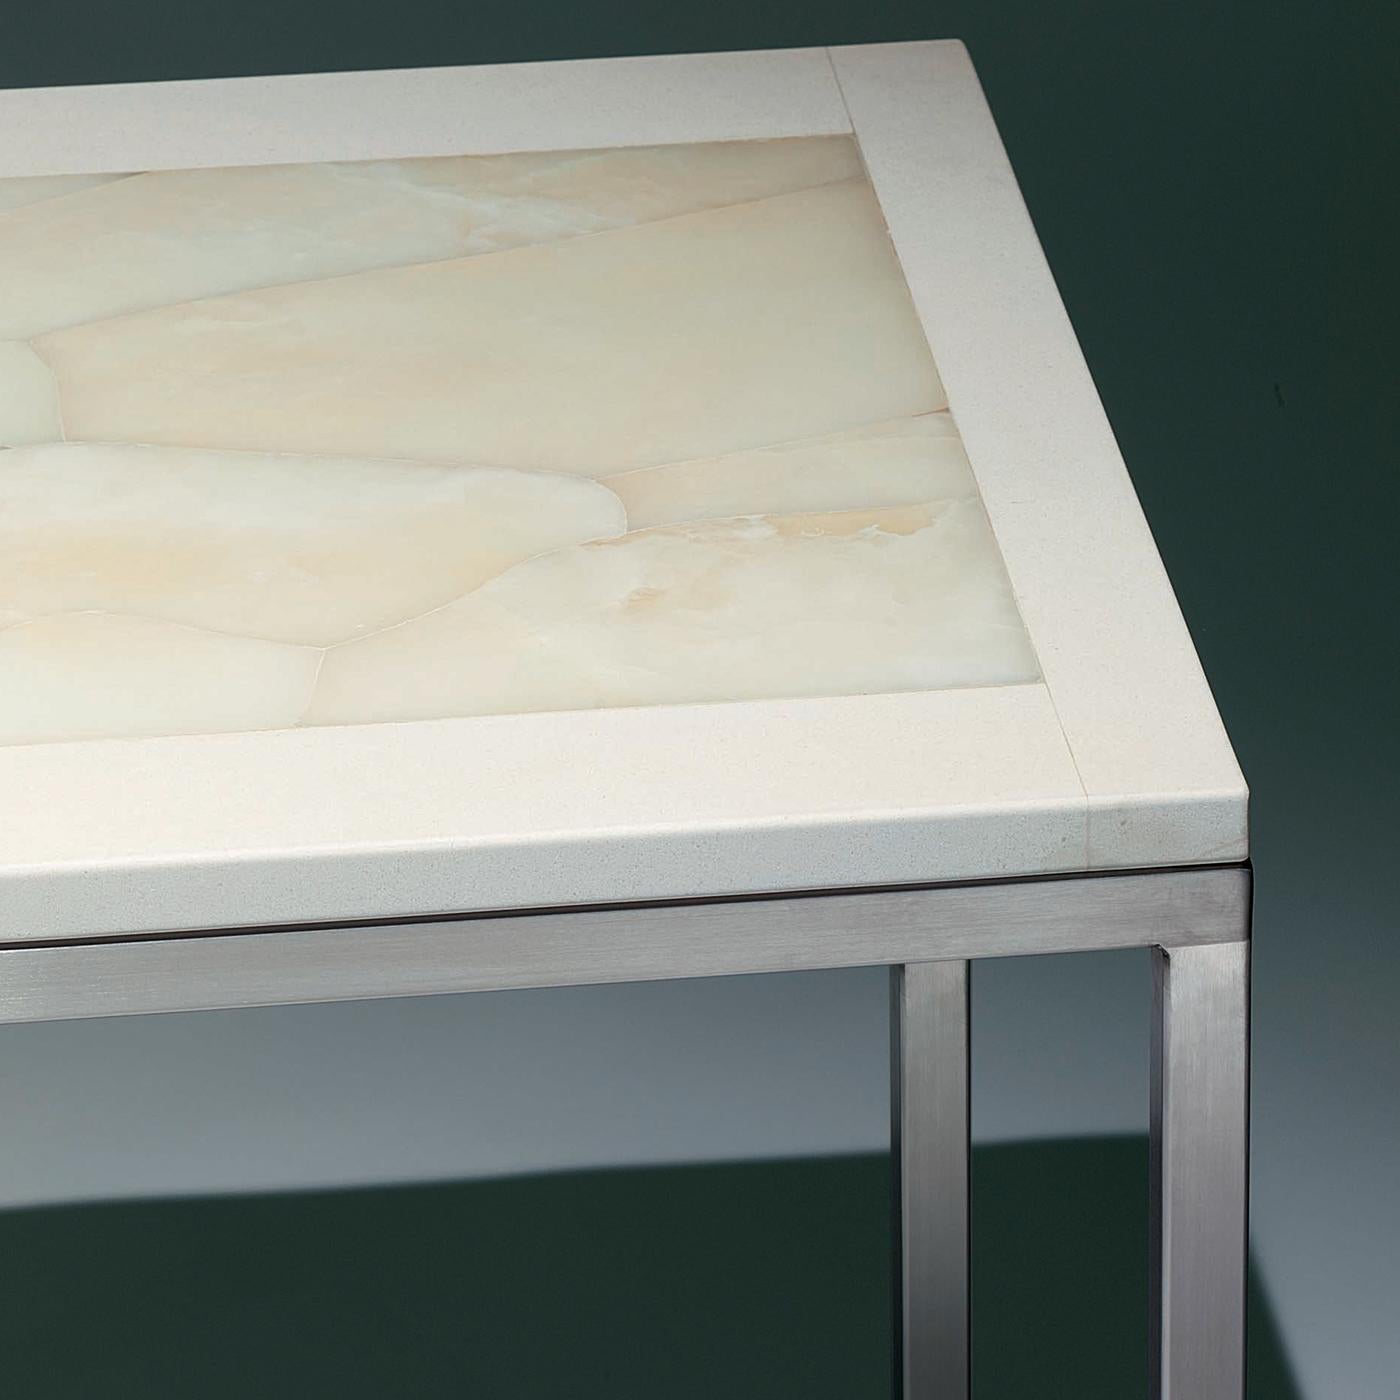 This side table features a hand inlaid white onyx top trimmed in ivory-colored limestone. Its matte, smooth surface provides a serene, calm look. Polished stainless steel legs complete the item with an added touch of sheen. This clean-styled,